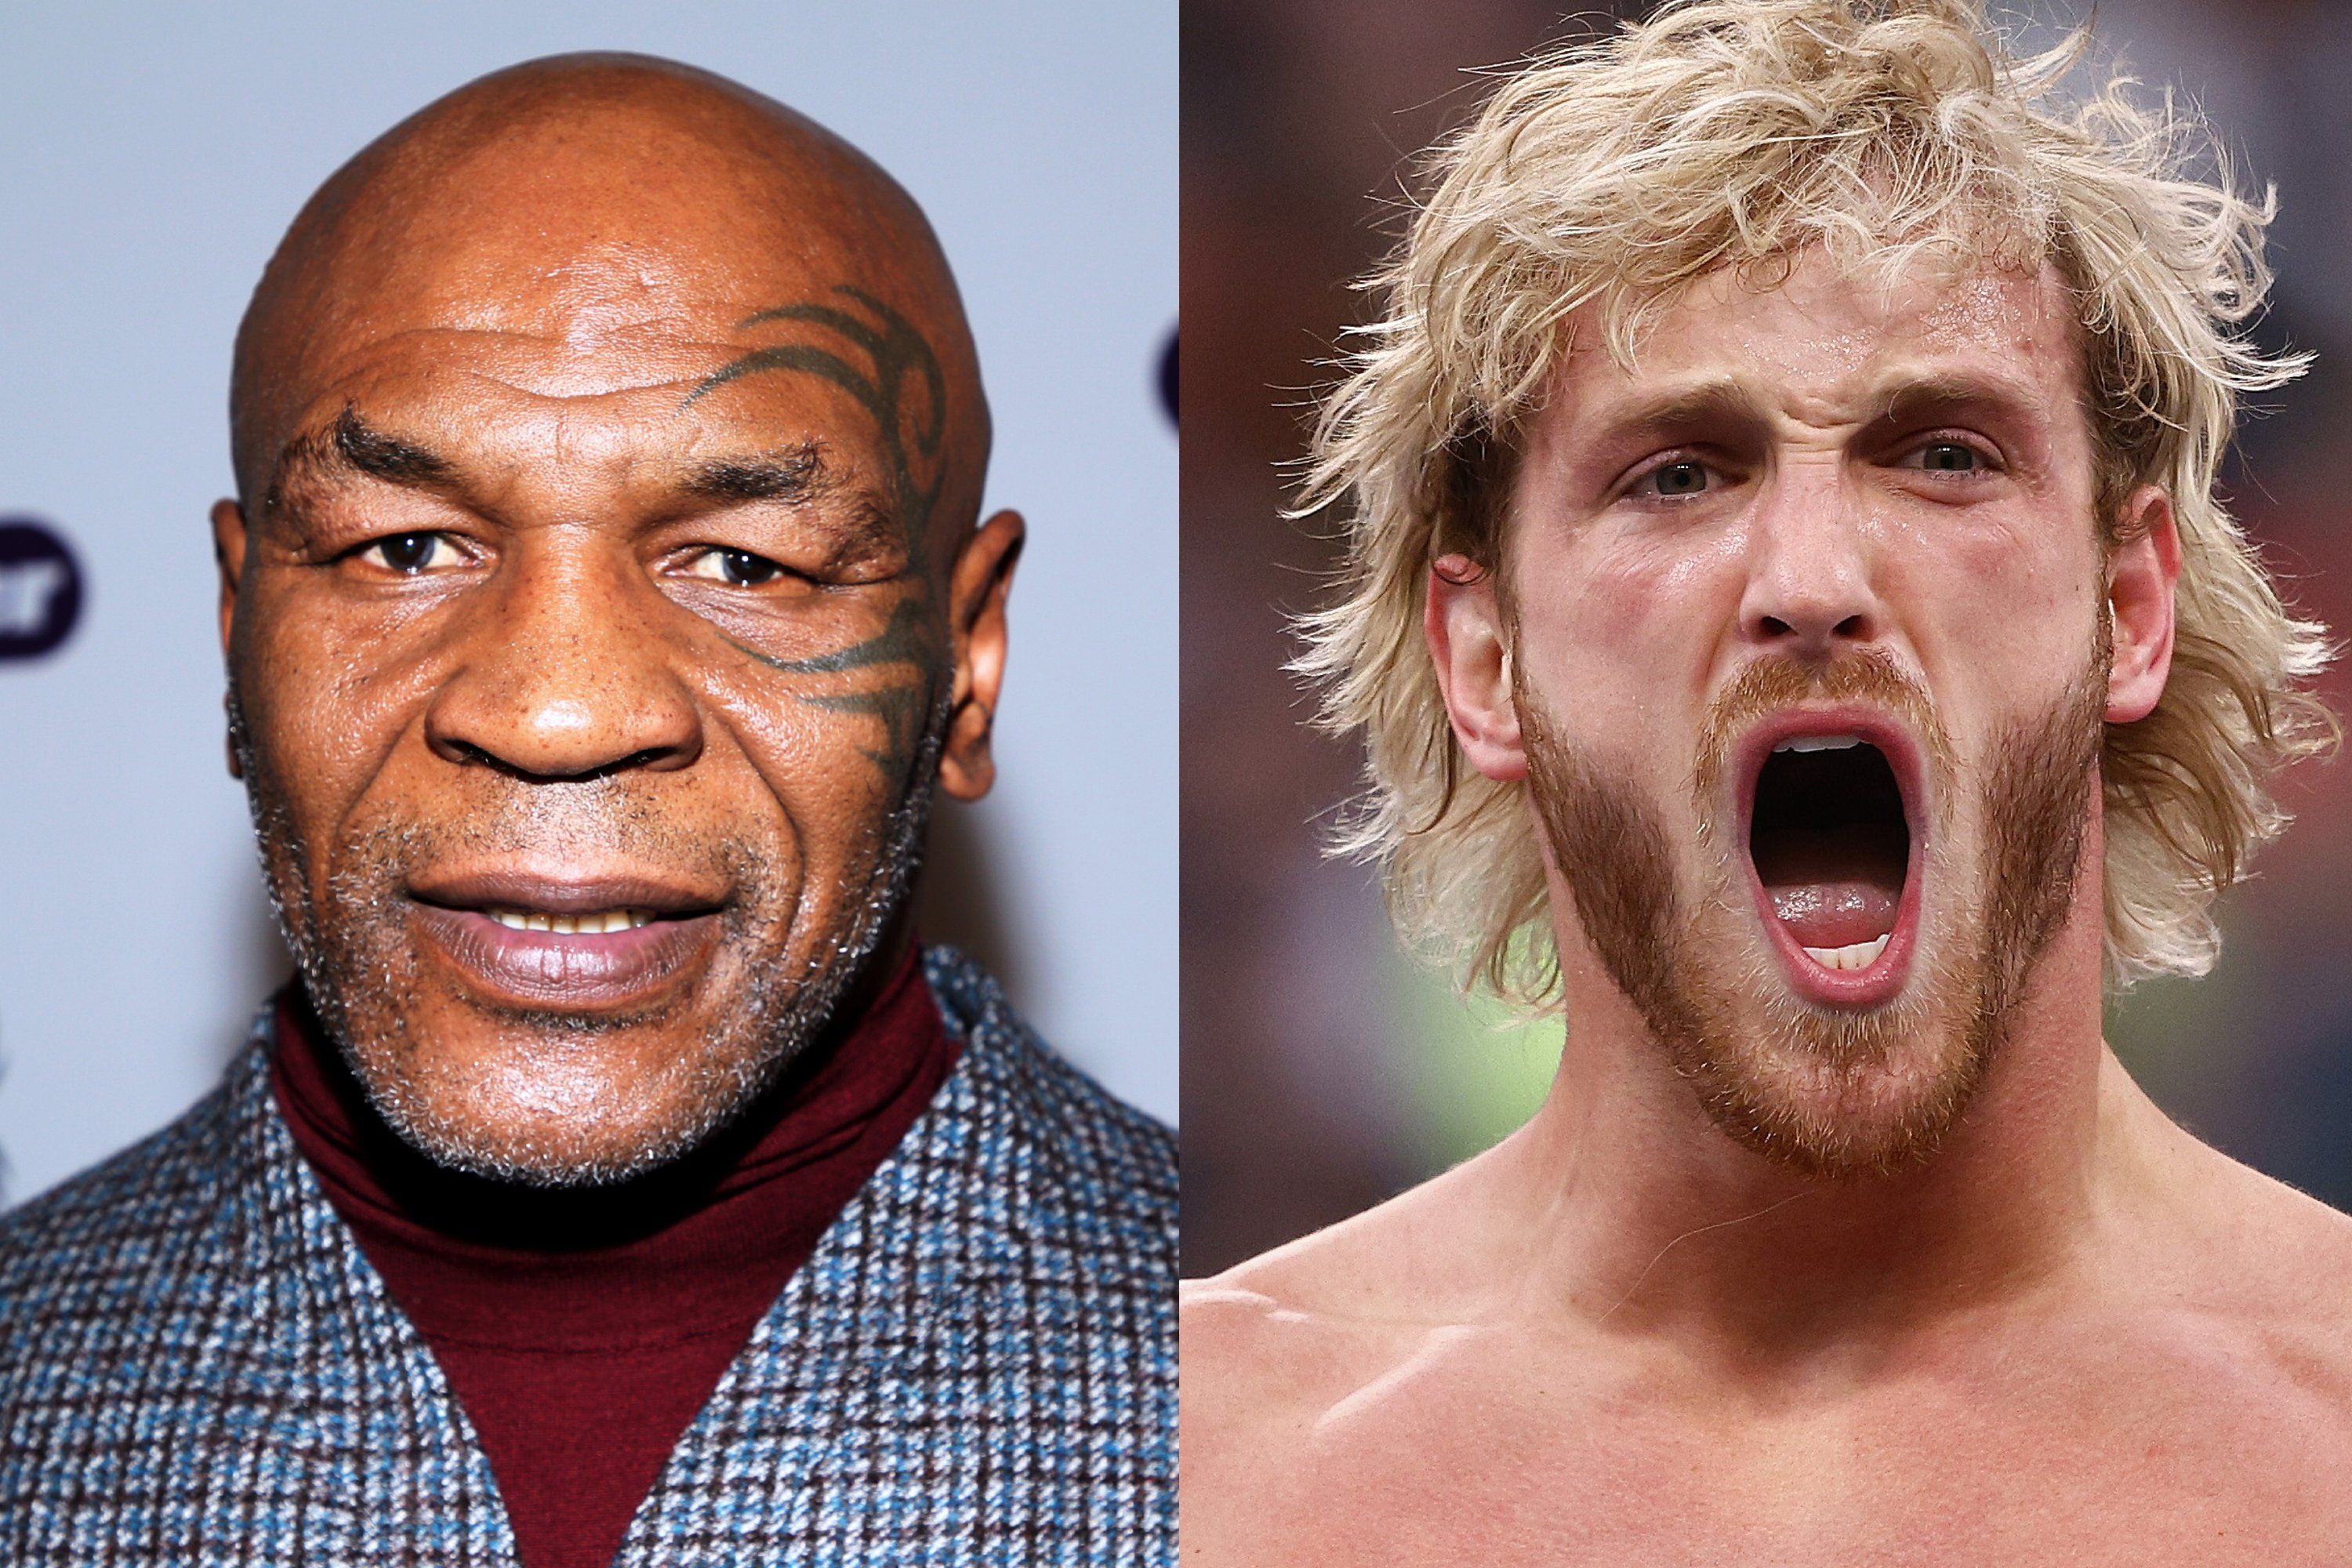 jake paul vows that he or mike tyson will 'die' in their boxing match